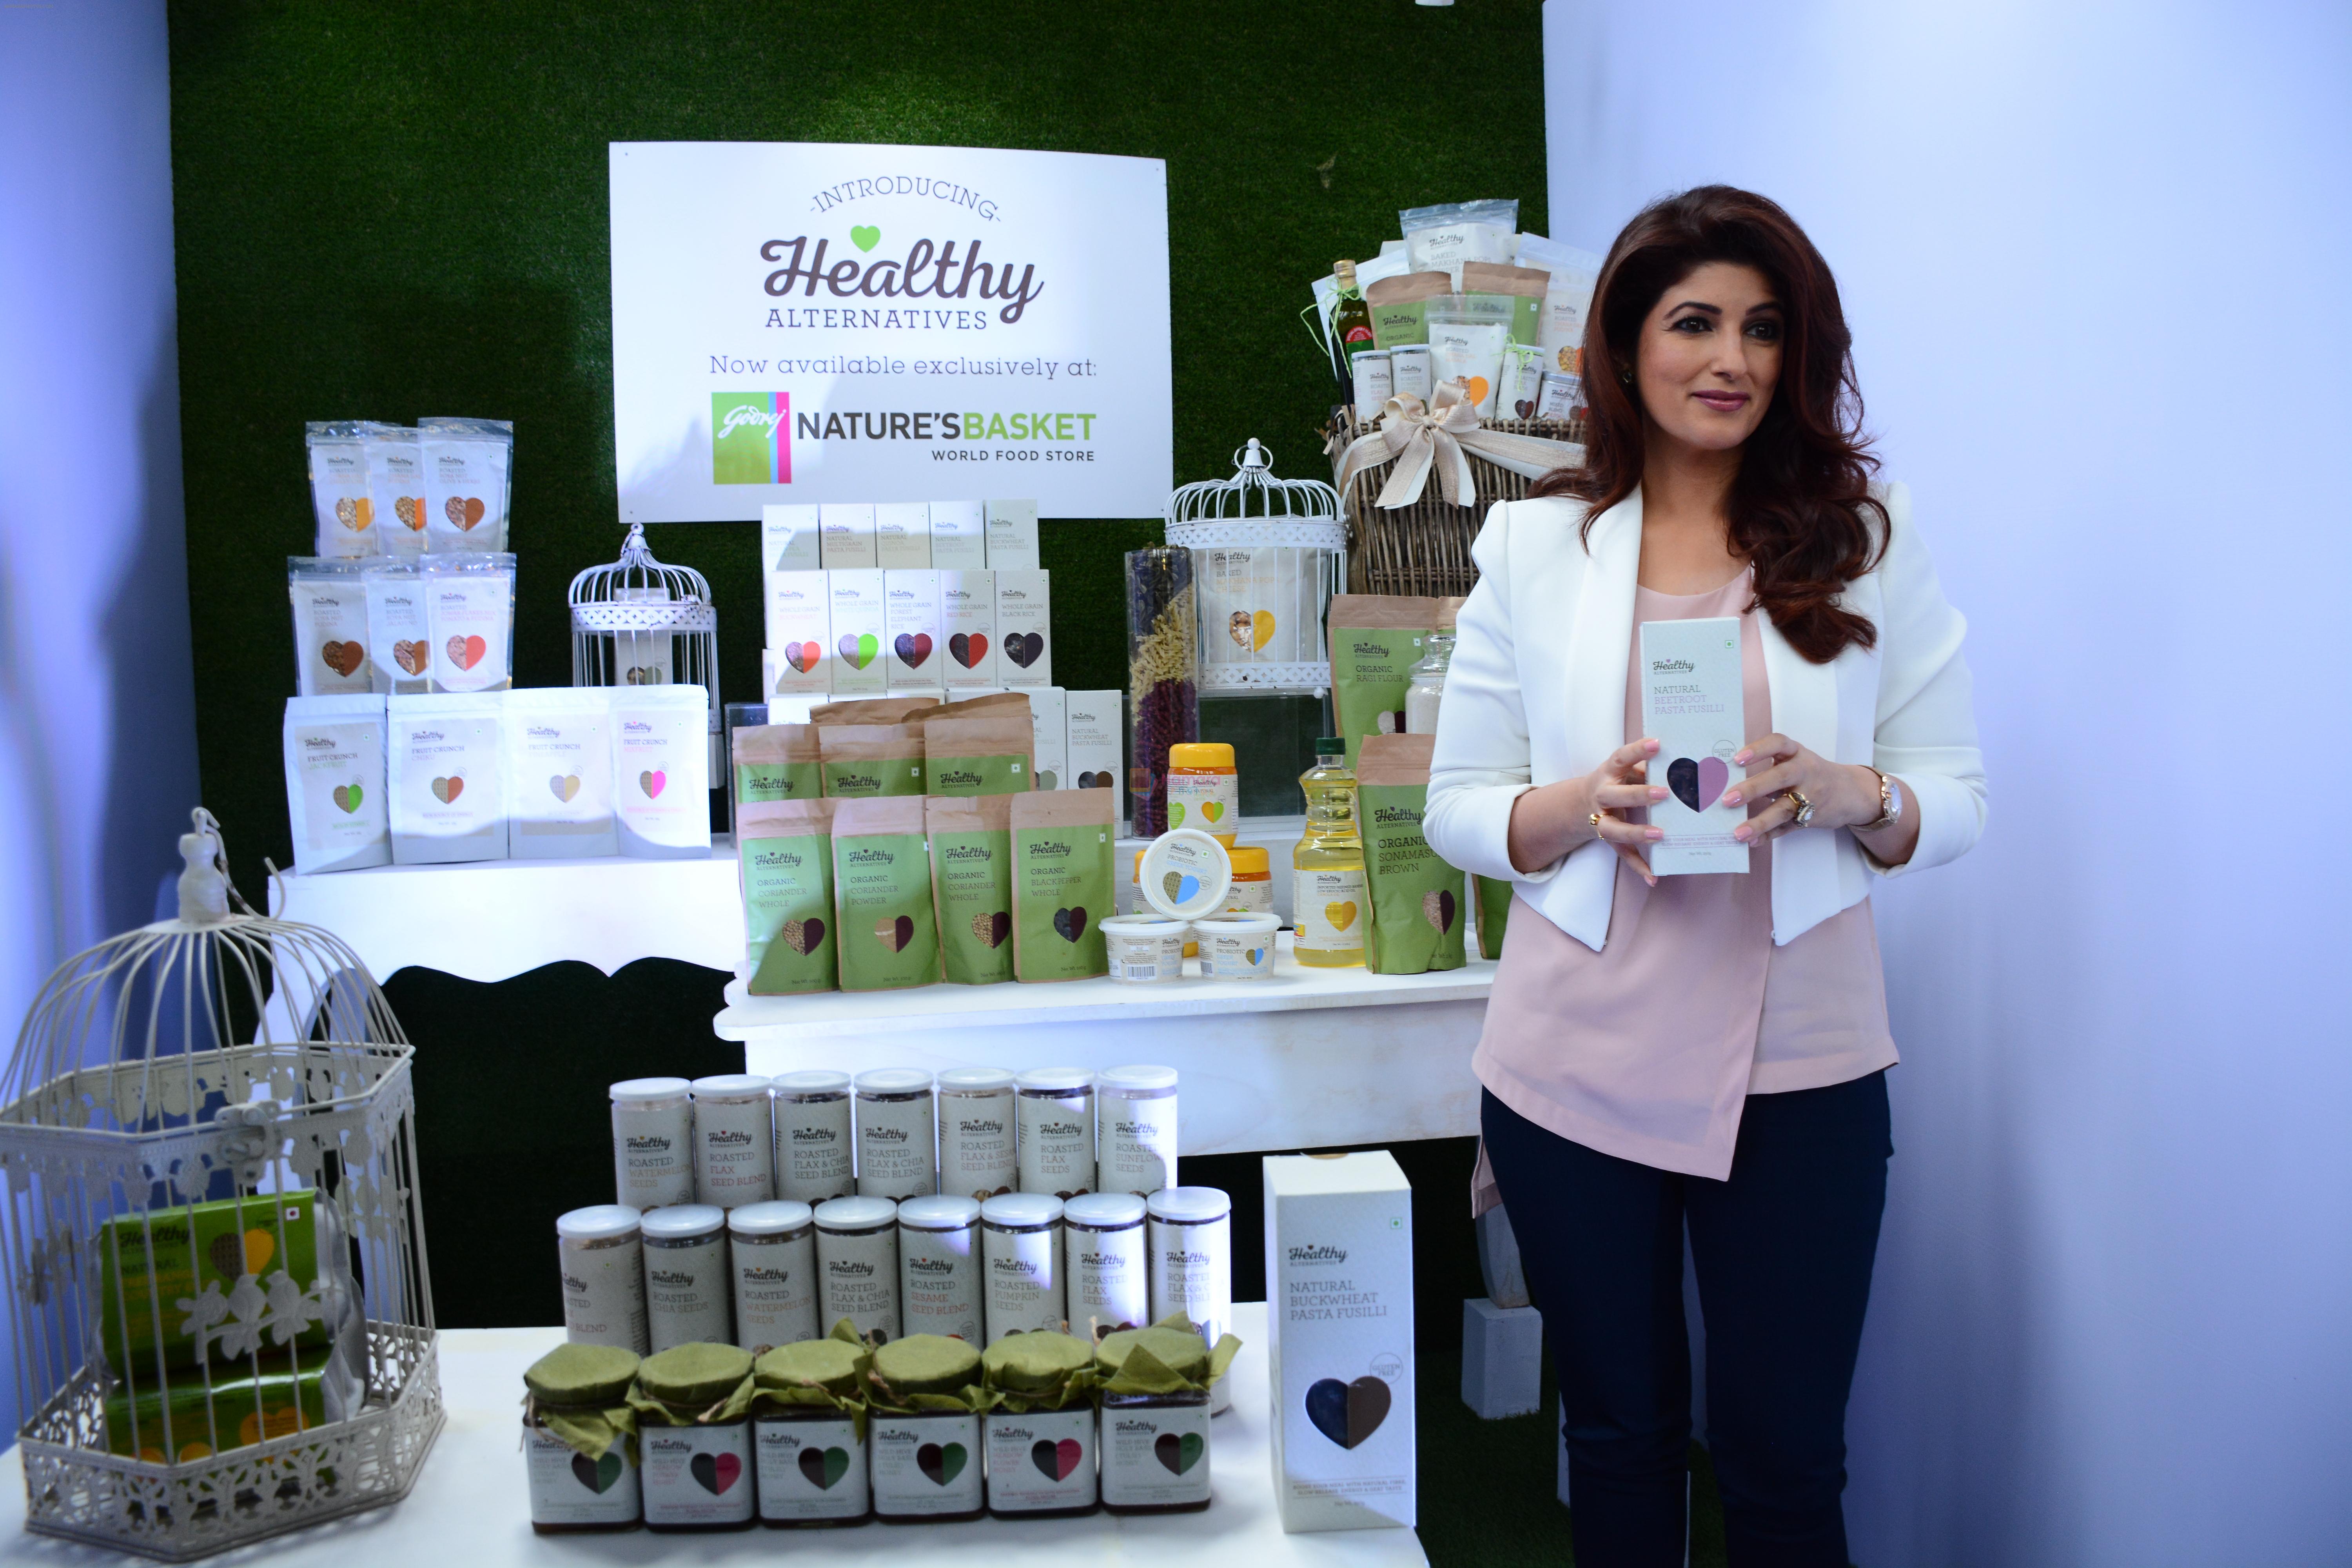 Twinkle Khanna at the launch of Healthy Alternatives